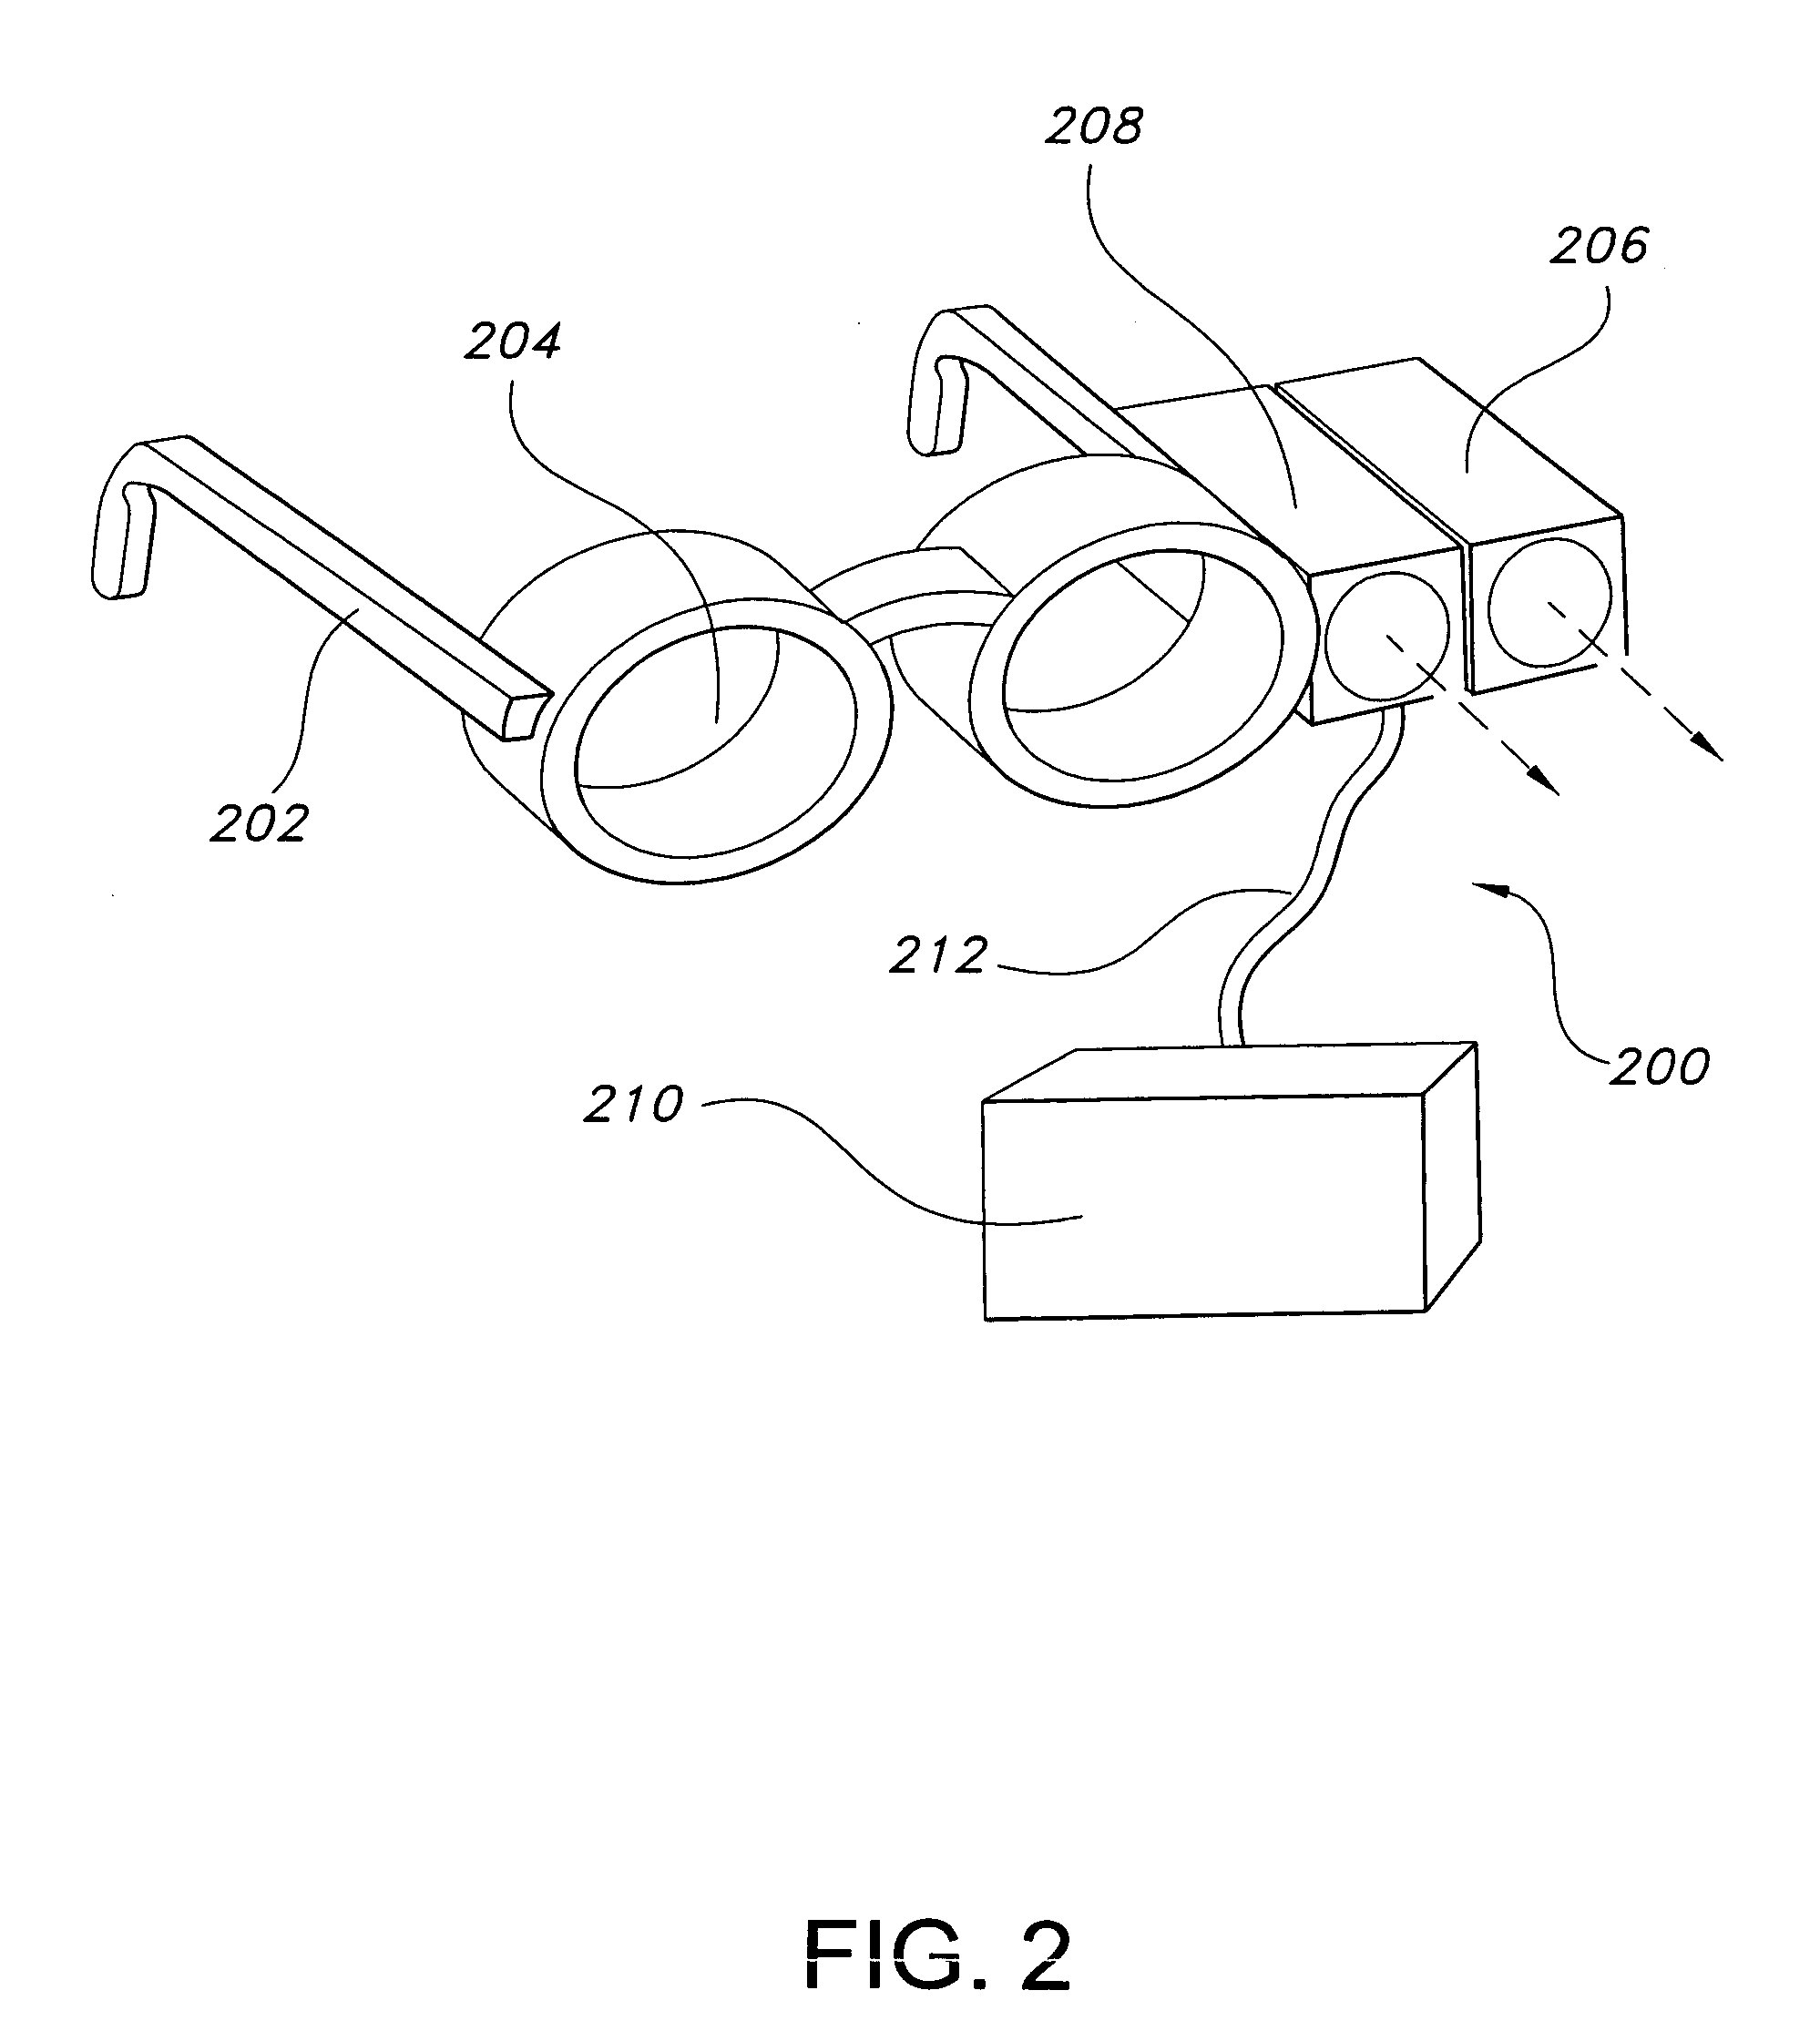 Item tracking and processing systems and methods